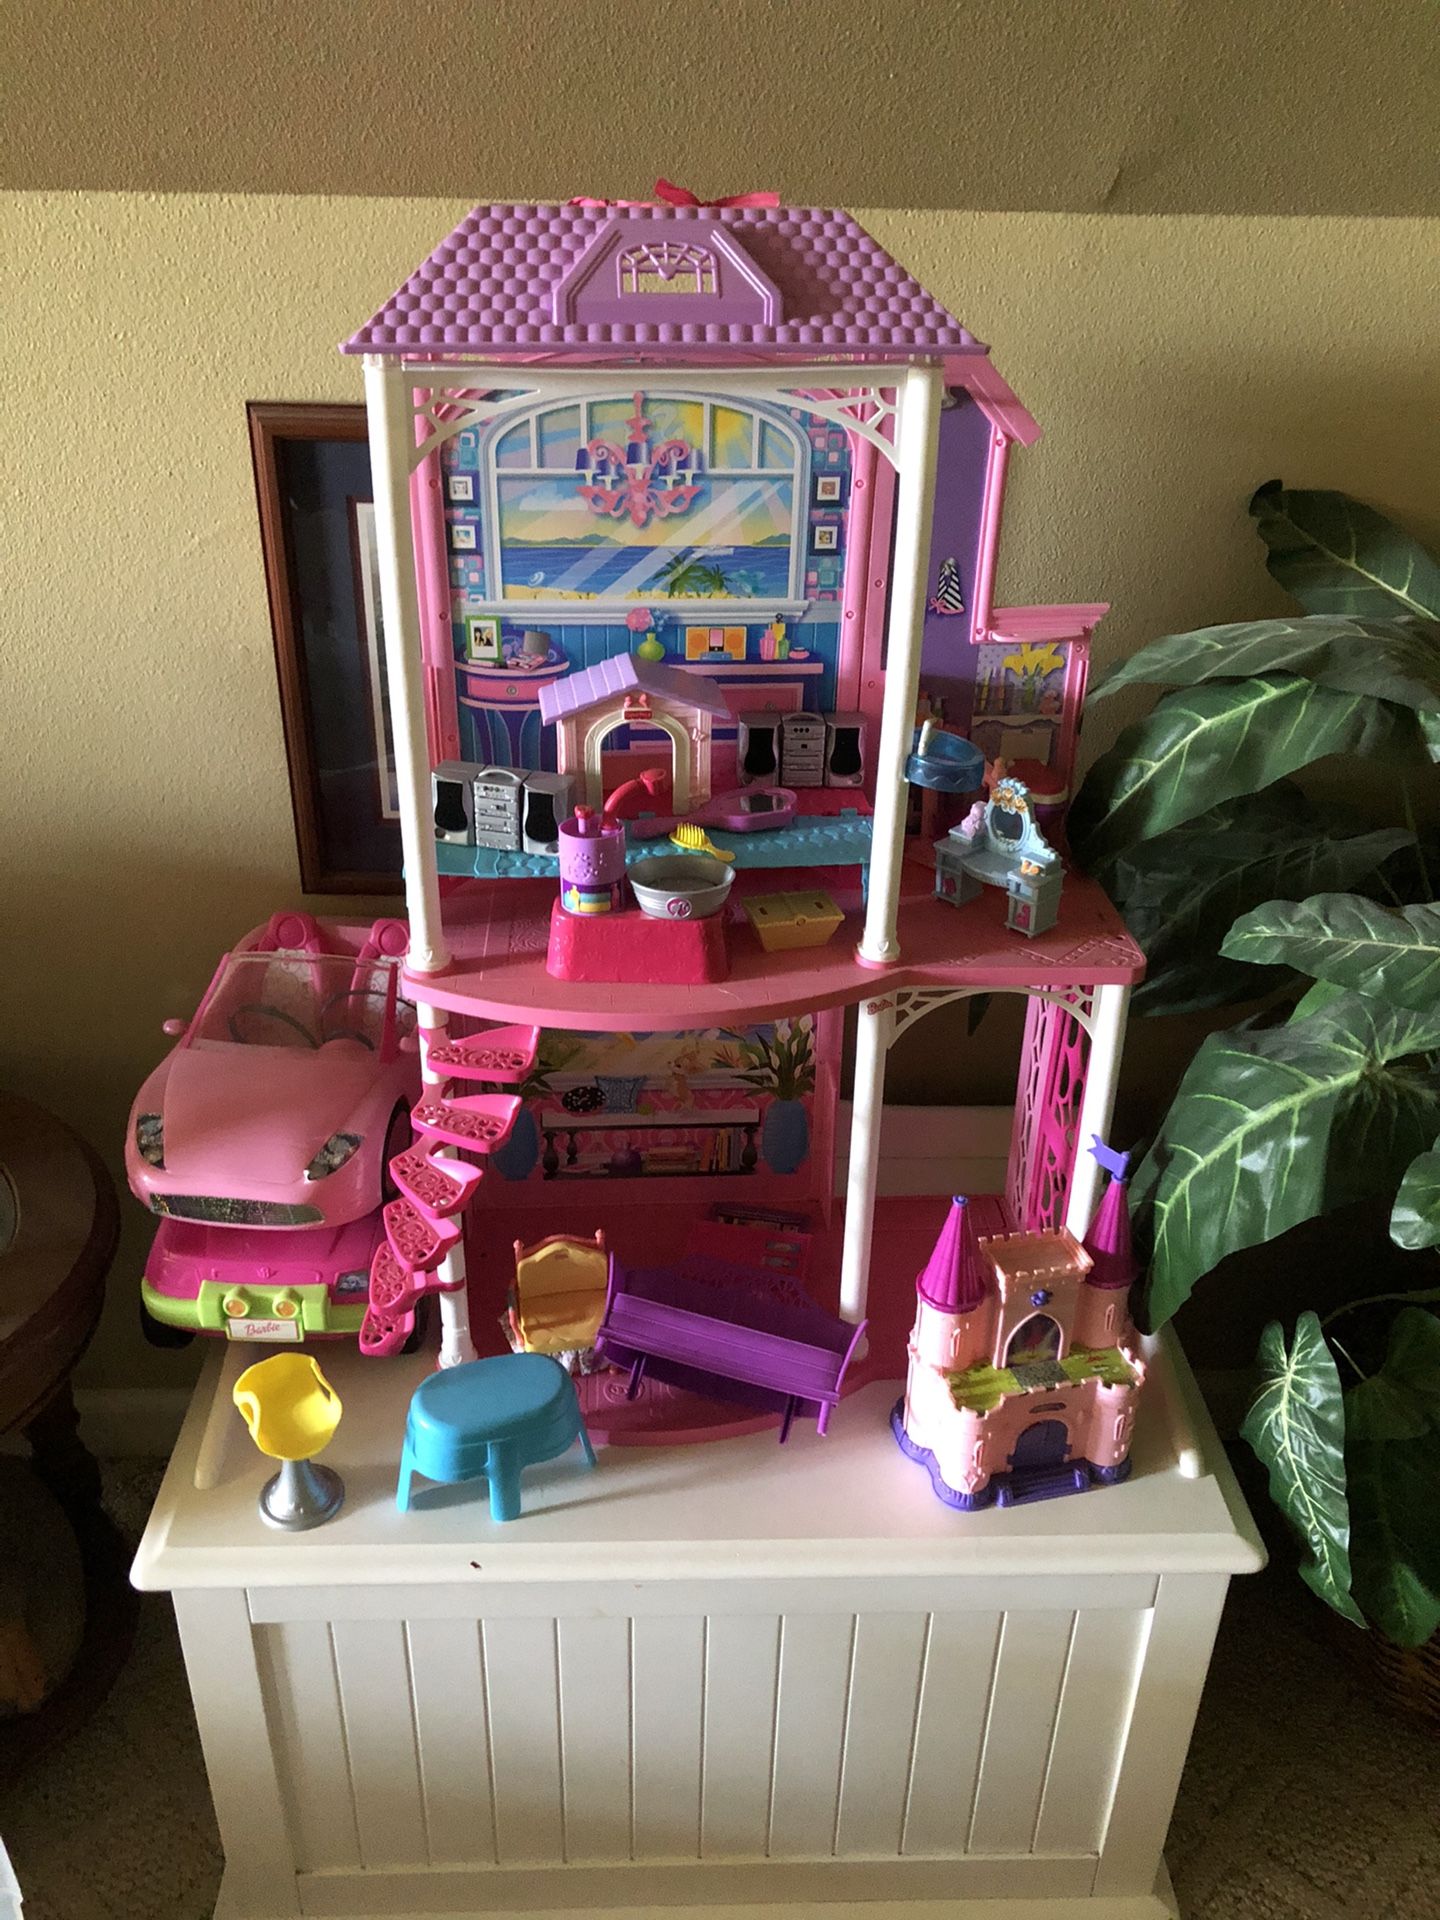 Assorted Barbie Dolls, House, Cars, American Girl Doll Beds, and sorted Clothes and accessories. All Sold together.